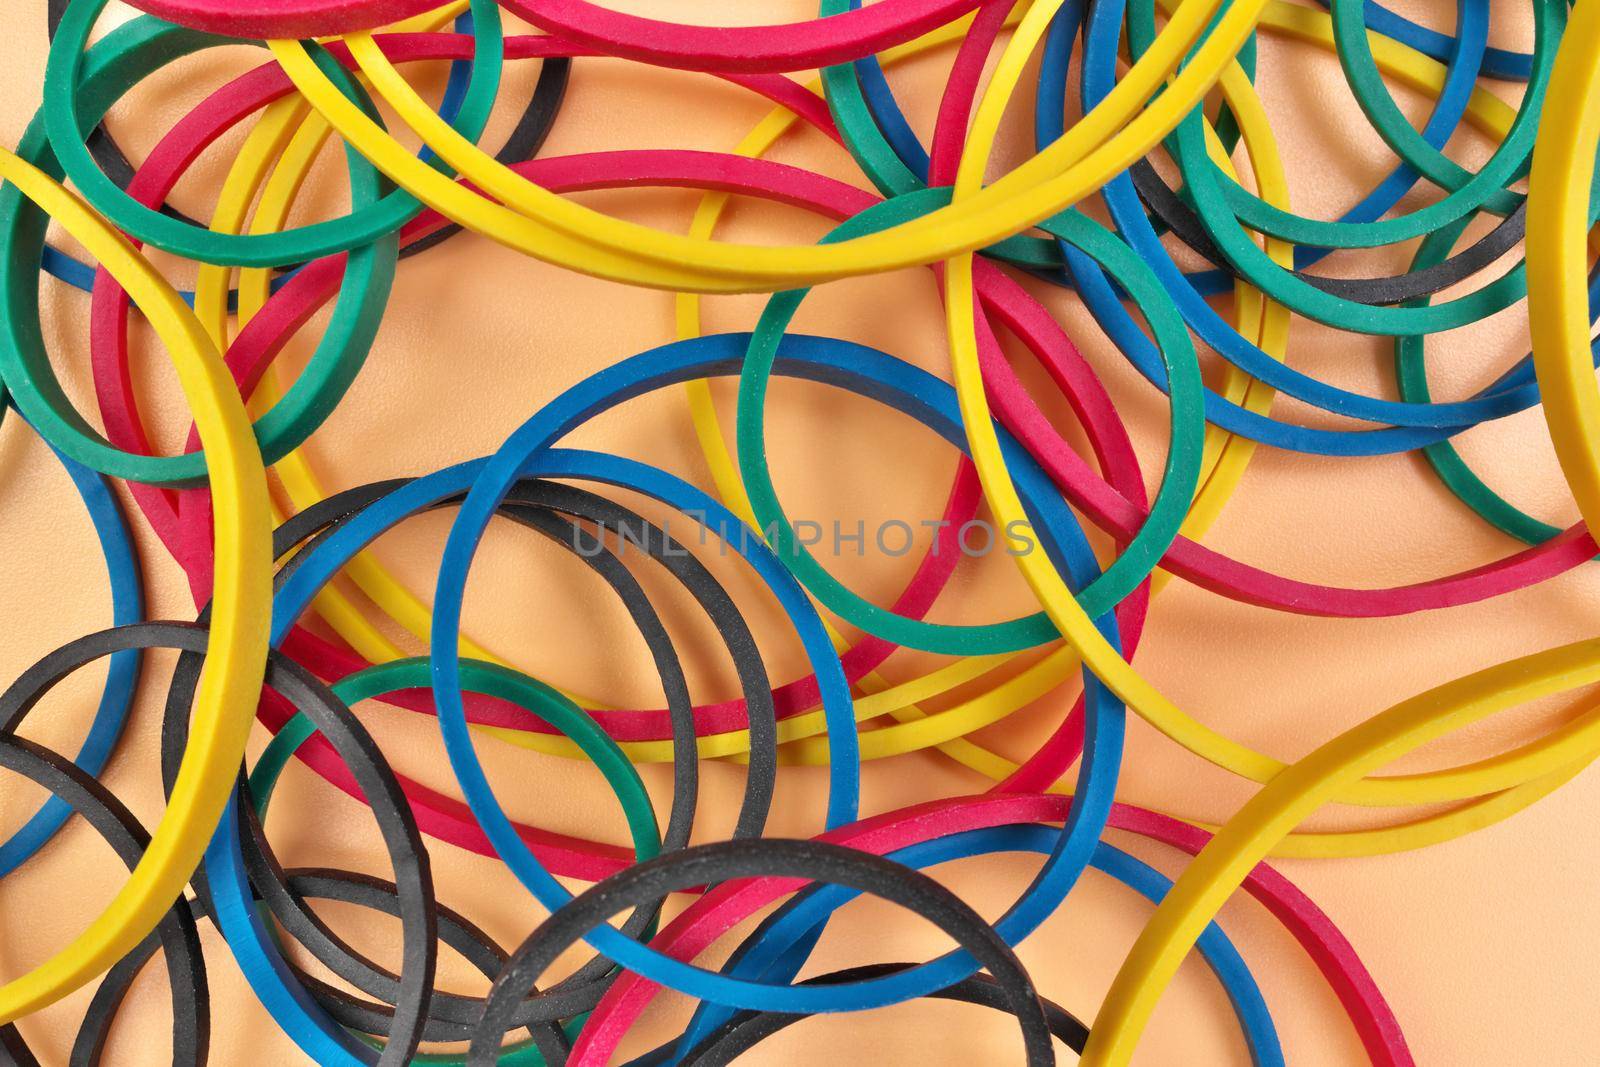 Full Frame Image Flatlay of Multicolored Elastic Rubber Bands on a Cheerful Orange Pastel Background by markvandam